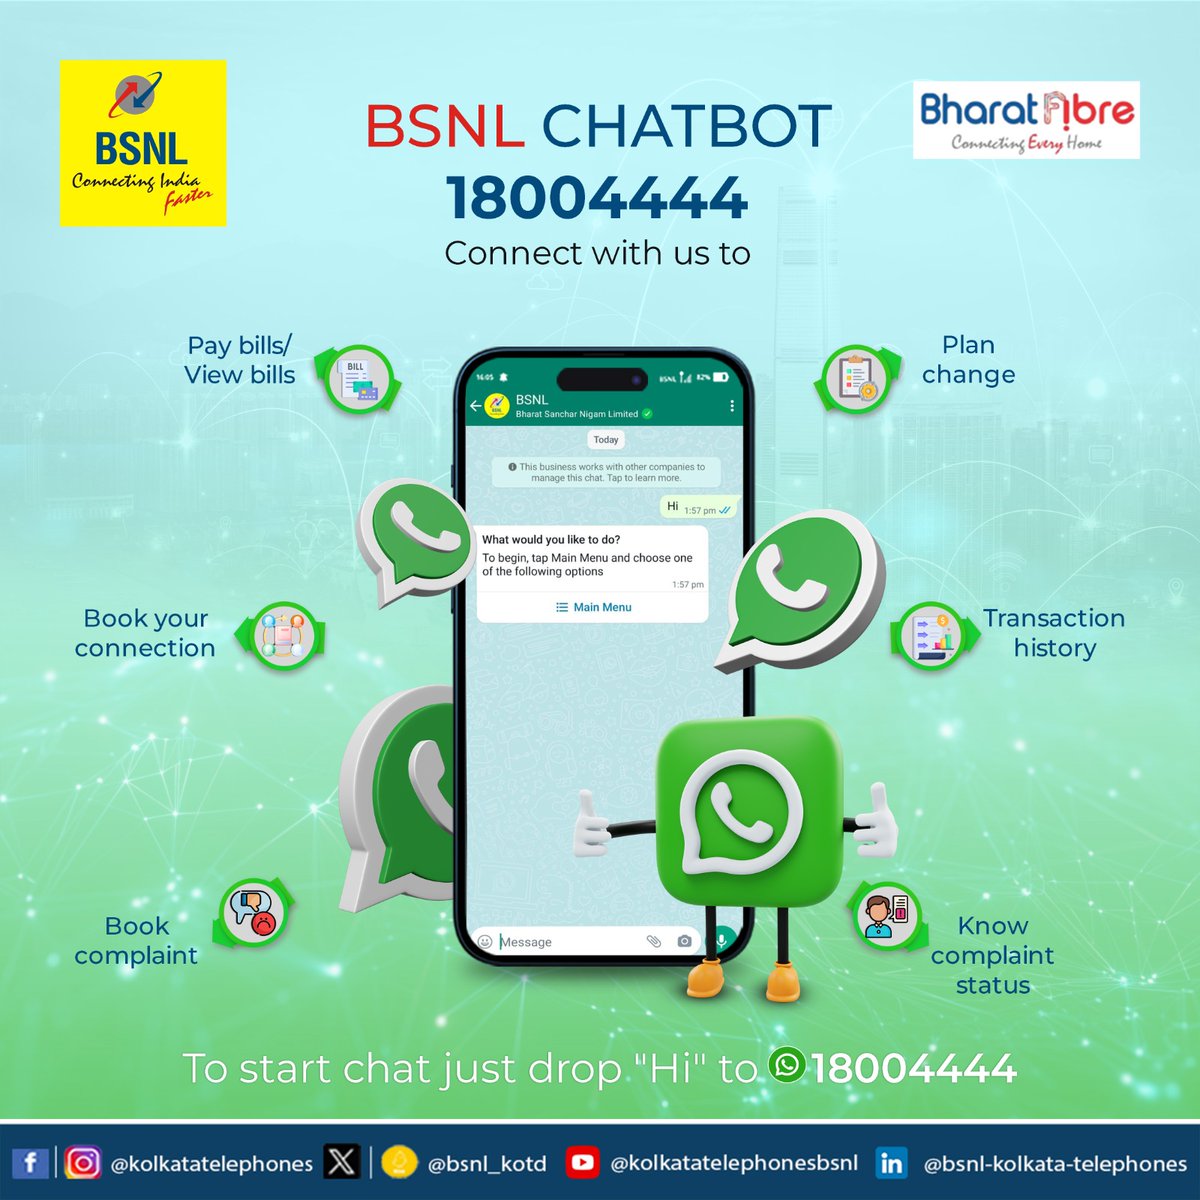 BSNL: Connecting India with Faster Internet and Fiber Optic Services. Pay Bills, View Bills, Book Connections, and Register Complaints Easily. 
 Chat with the BSNL Chatbot at 18004444. Drop 'Hi' to Get Started!#BharatFibre #UnlimitedInternet #HighspeedInternet #FibreBroadband